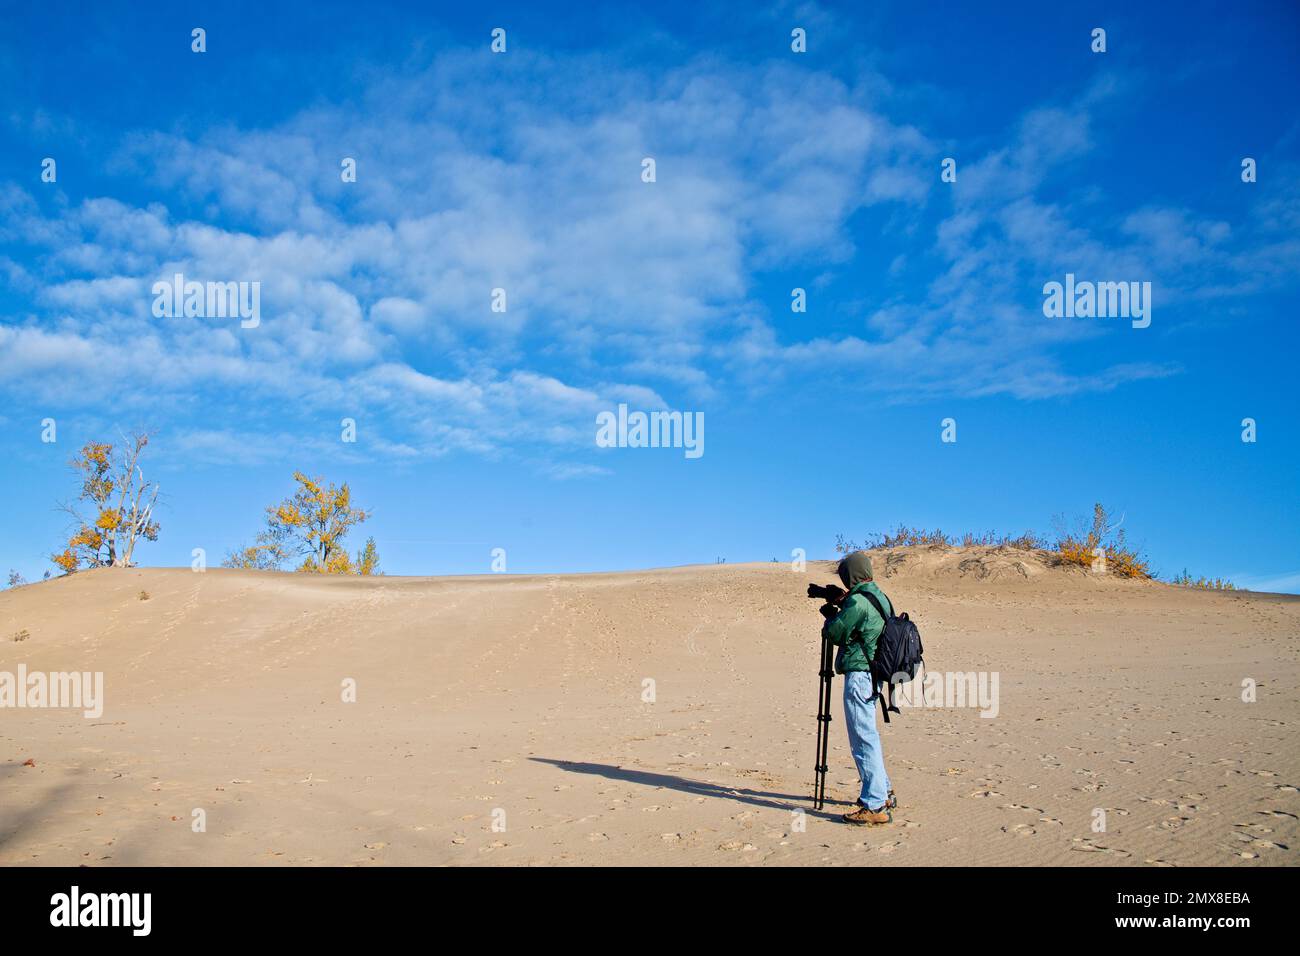 A male photographer taking photos on the sand dune with blue sky and autumn leaf colour Stock Photo